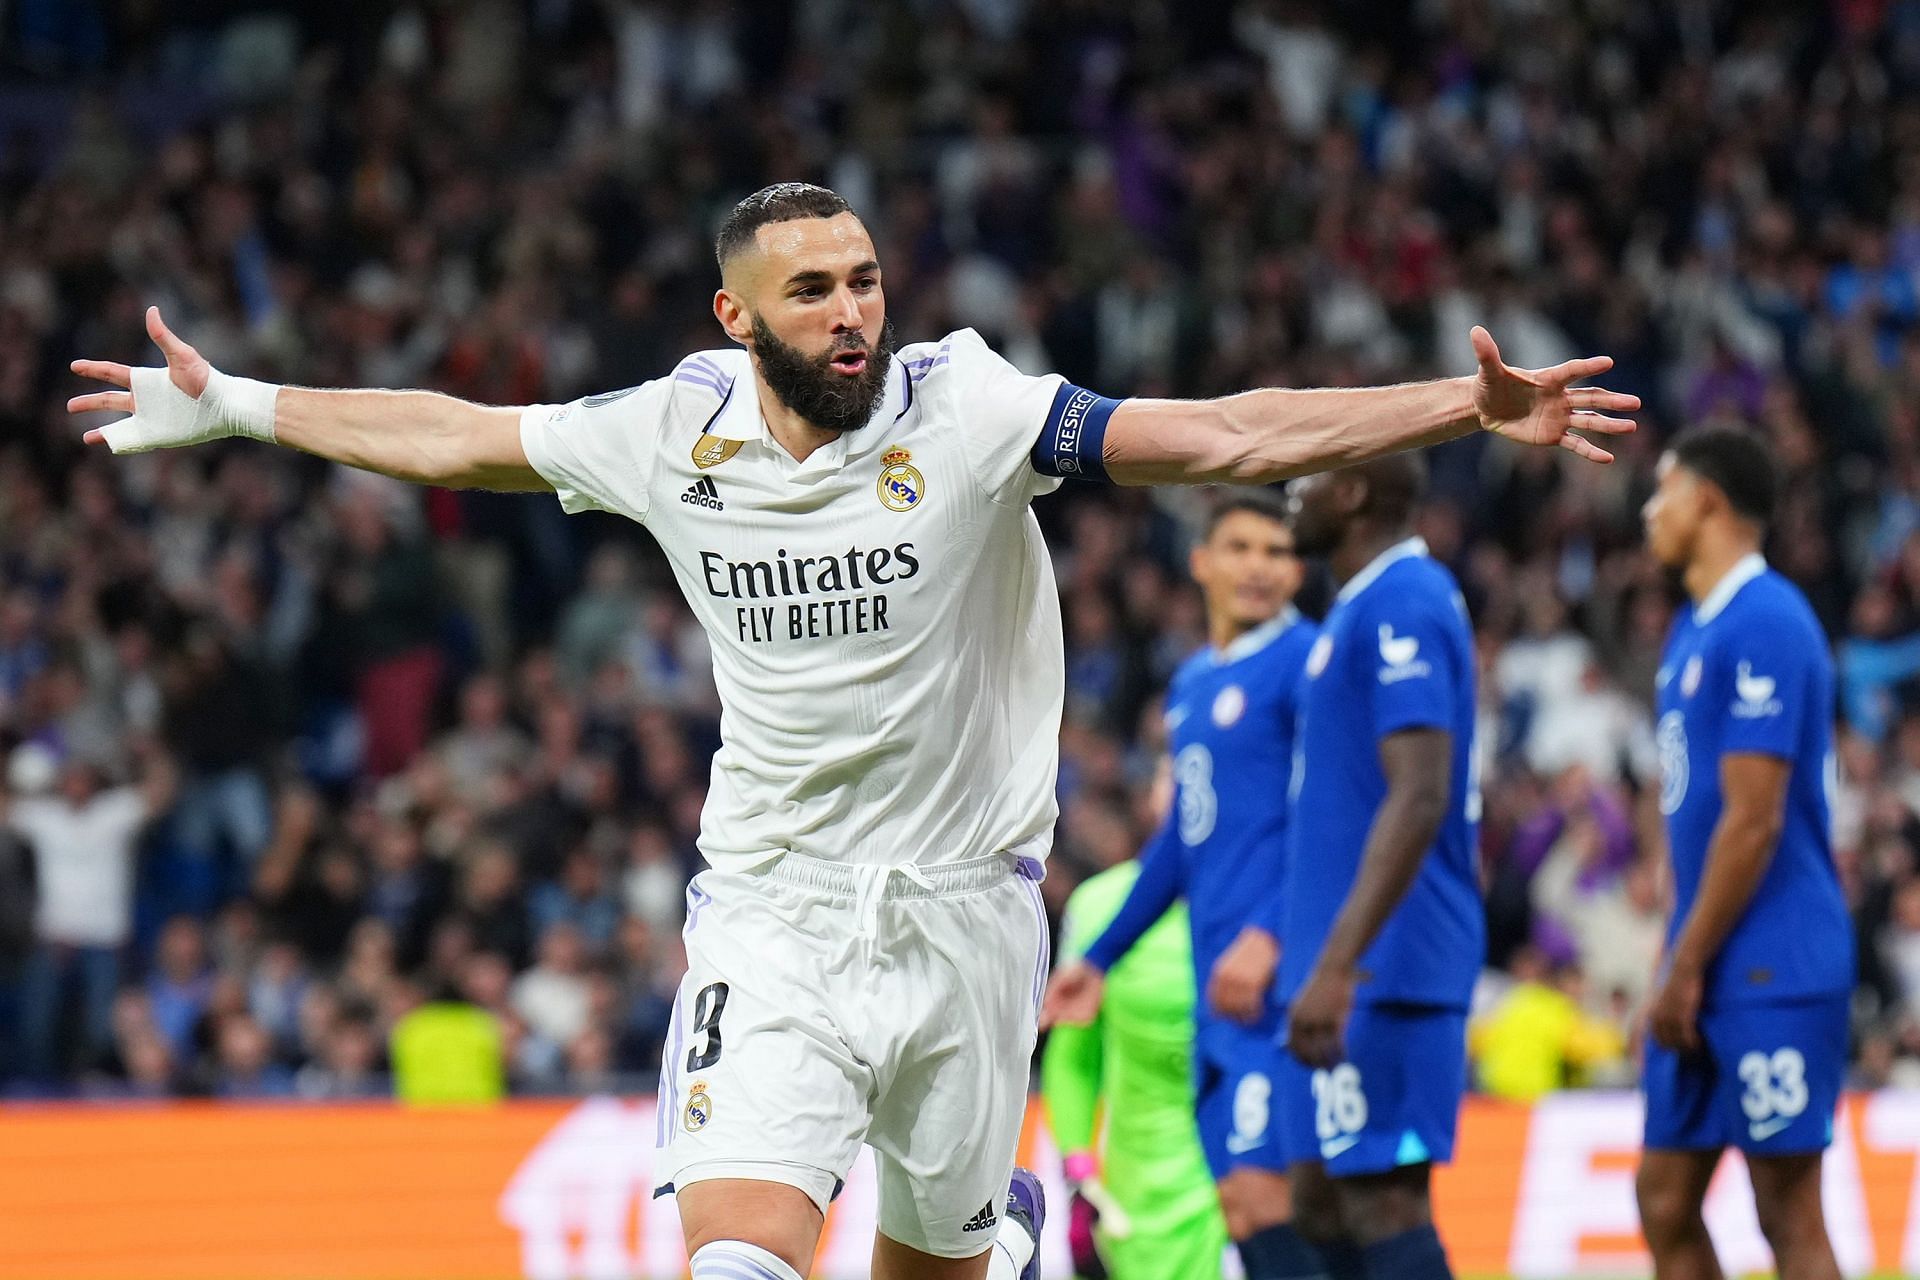 Real Madrid 2-0 Chelsea: Player Ratings as Benzema and Asensio score for Los Blancos in a comfortable win | UEFA Champions League 2022-23